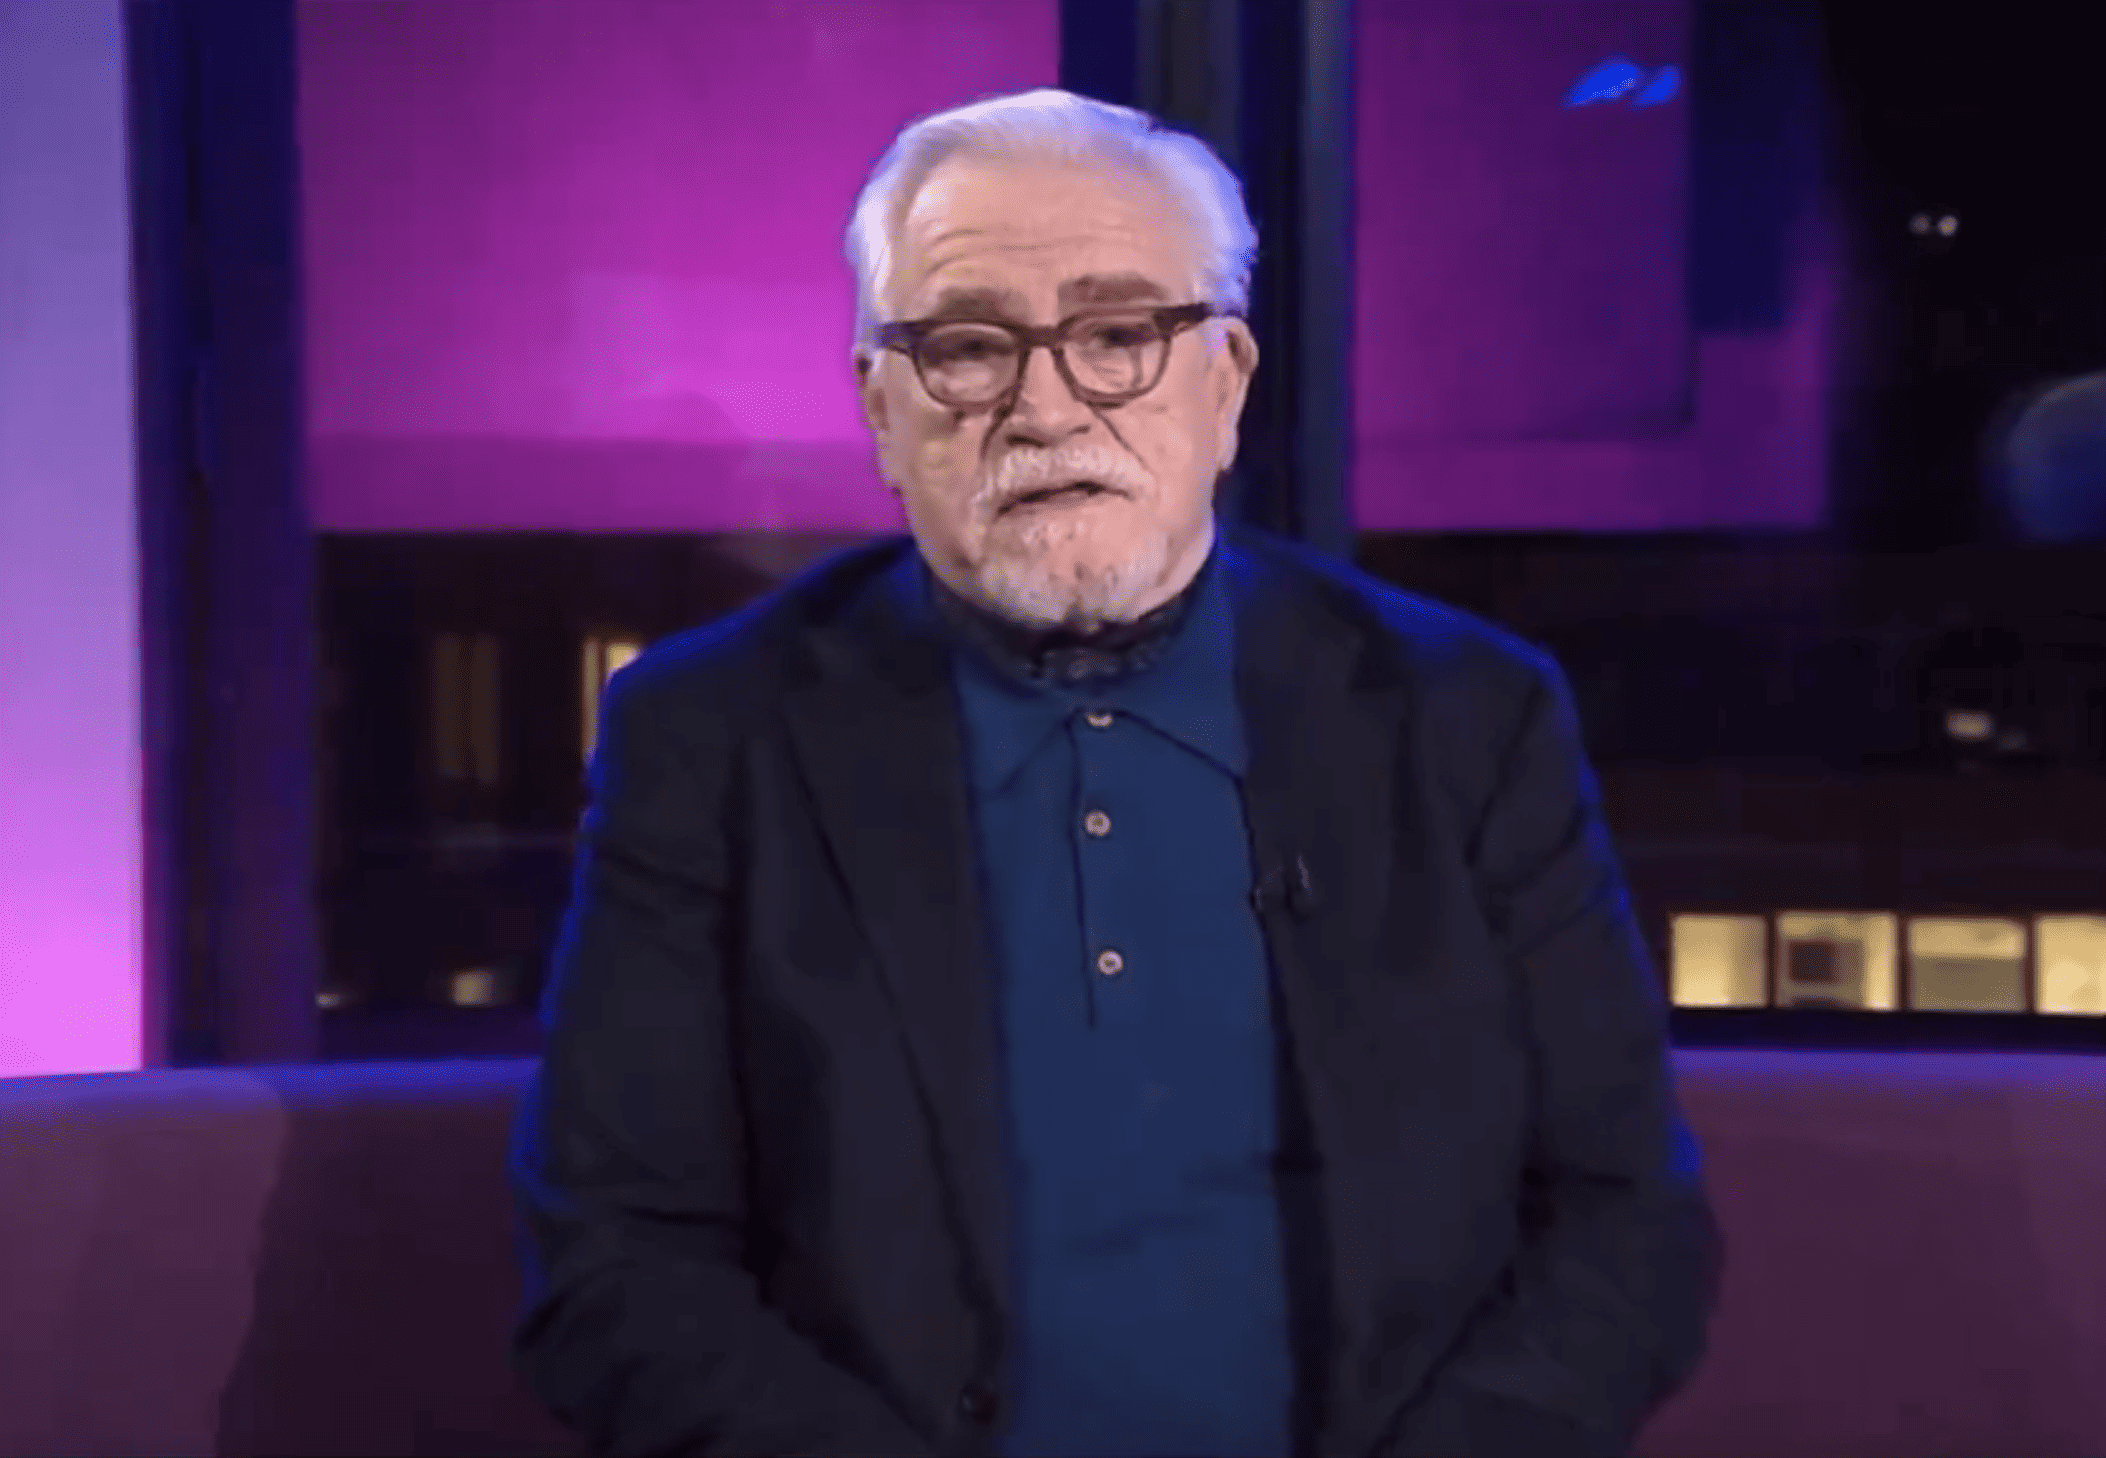 Brian Cox signs off Newsnight in the most Logan Roy way possible